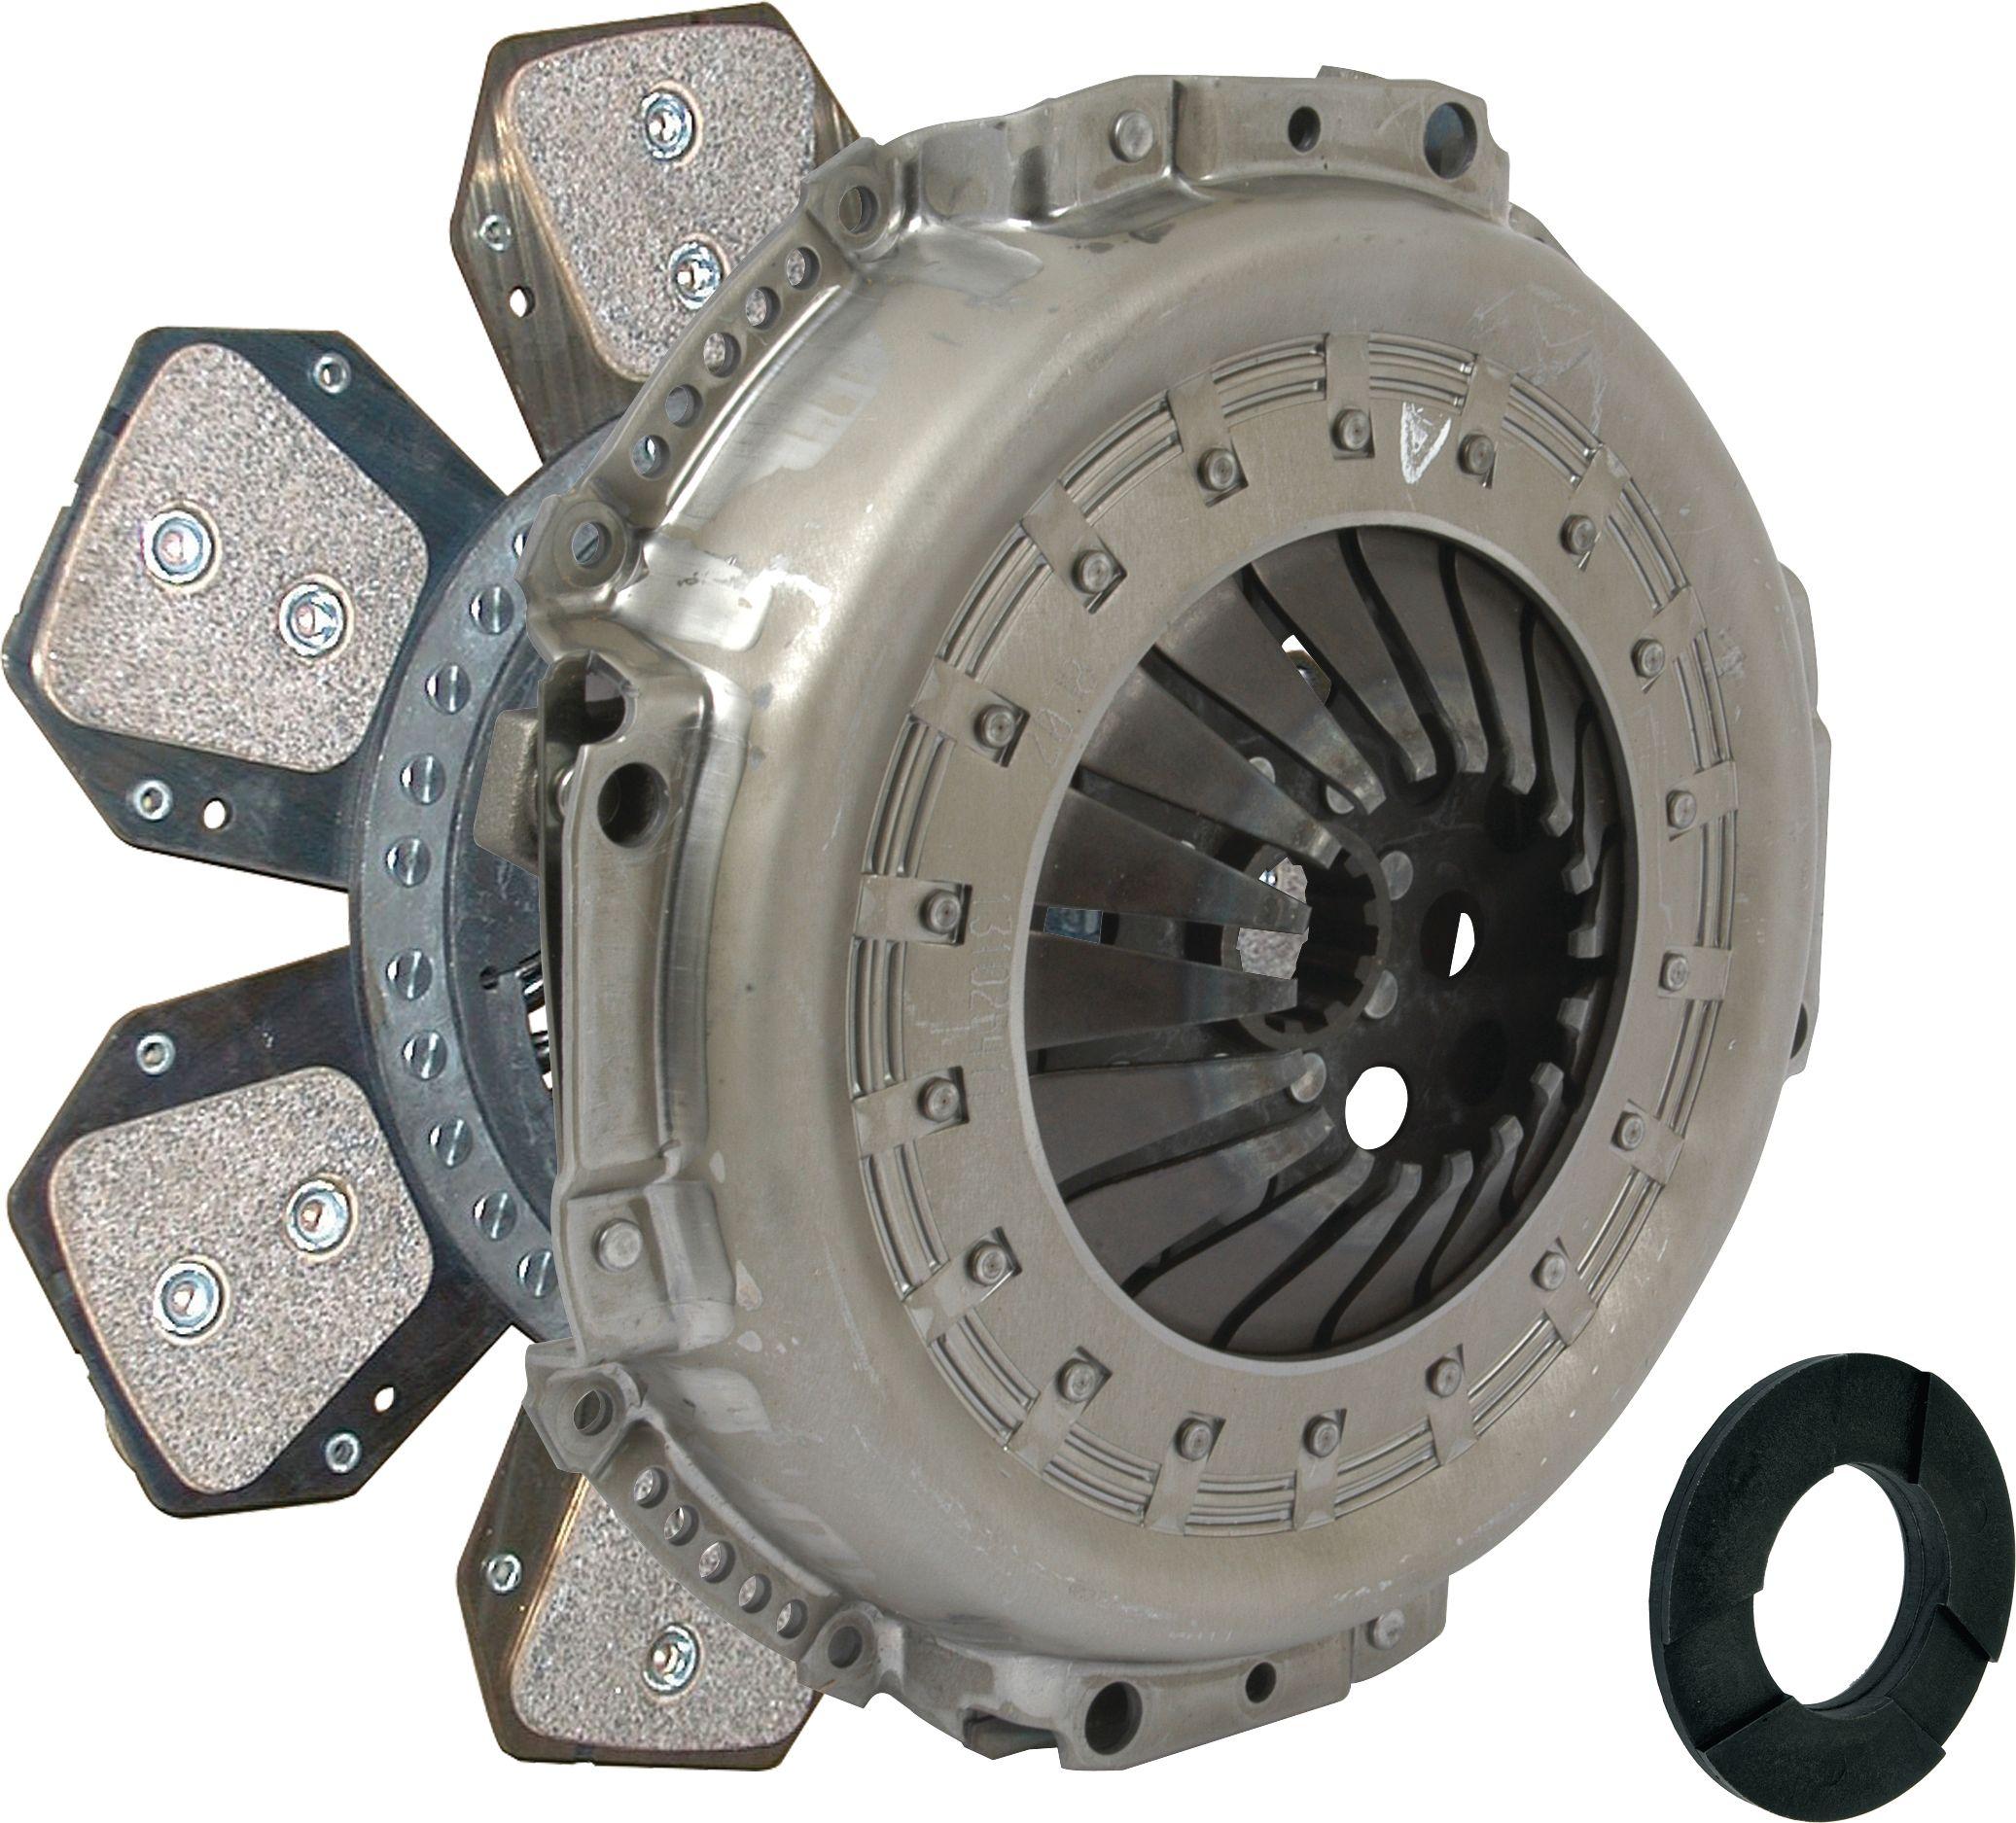 CASE IH CLUTCH KIT WITHOUT BEARINGS 73034